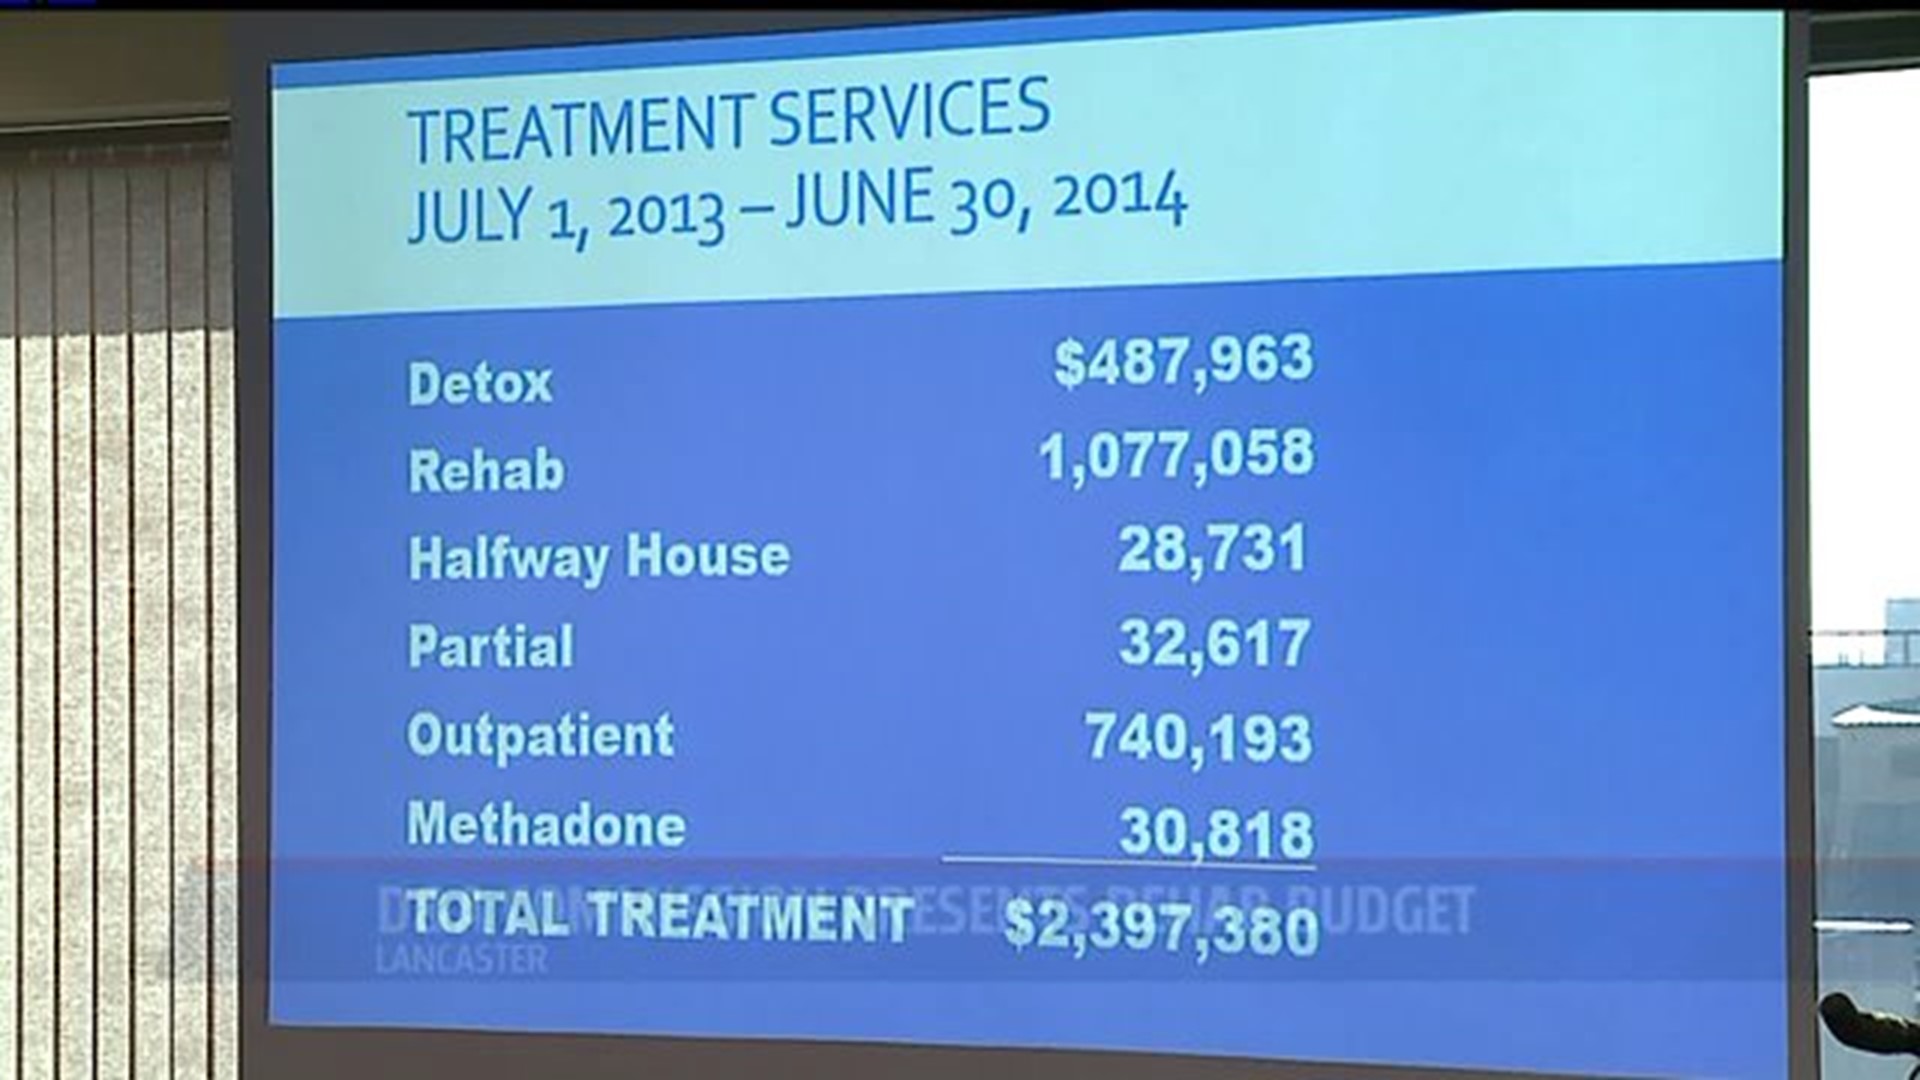 Funding issues affecting treatment fro drug addicts in Lancaster County